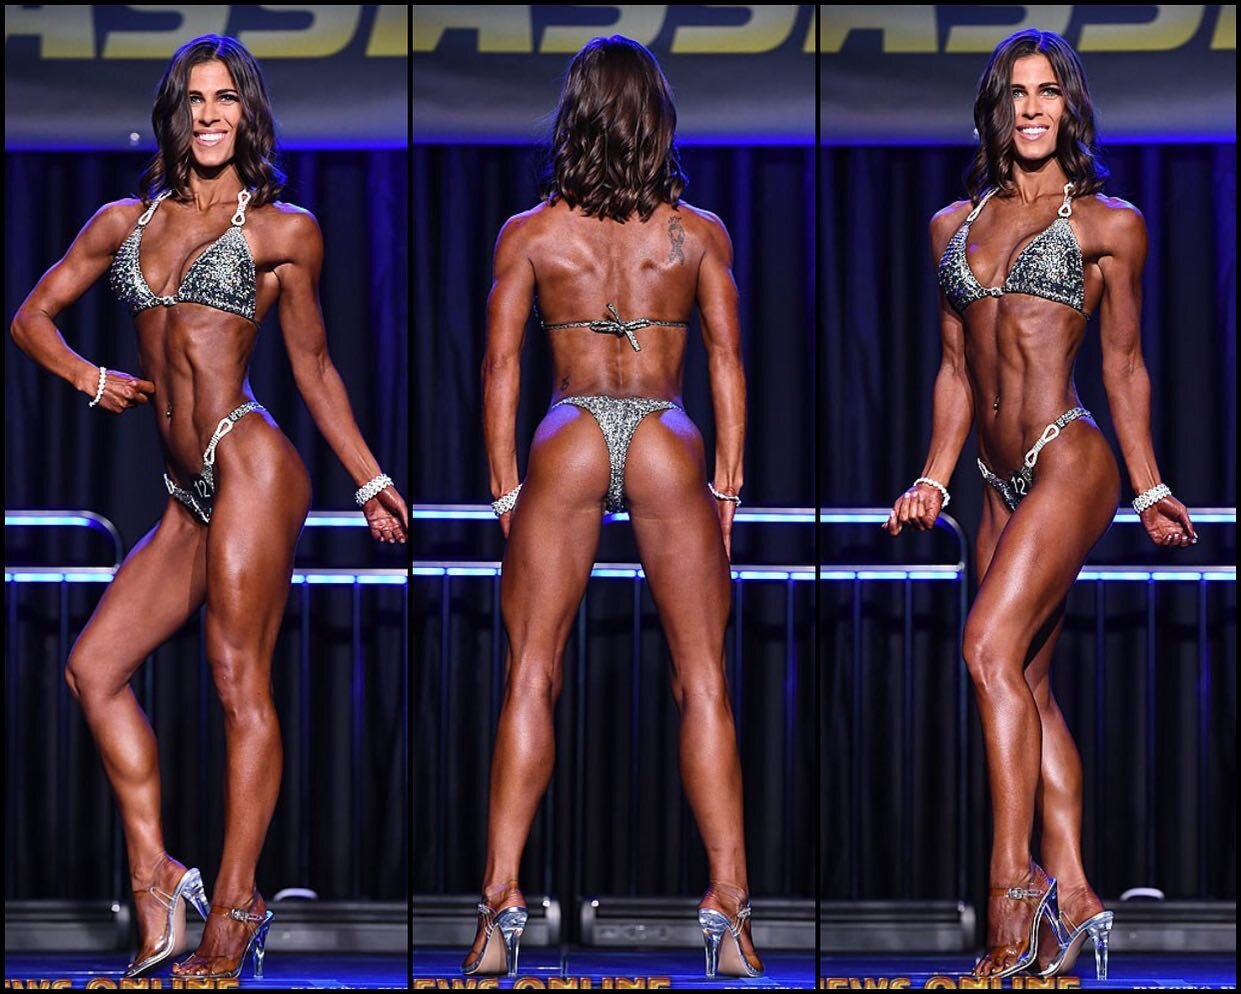 Congratulations to @ash_bashfitness on her showing at the NPC Warrior Classic. Ash took second in novice bikini and third in her open class.
➖
Ash reached out and began working with coach @ecstormtrooper back in February. Fortunately her target show 